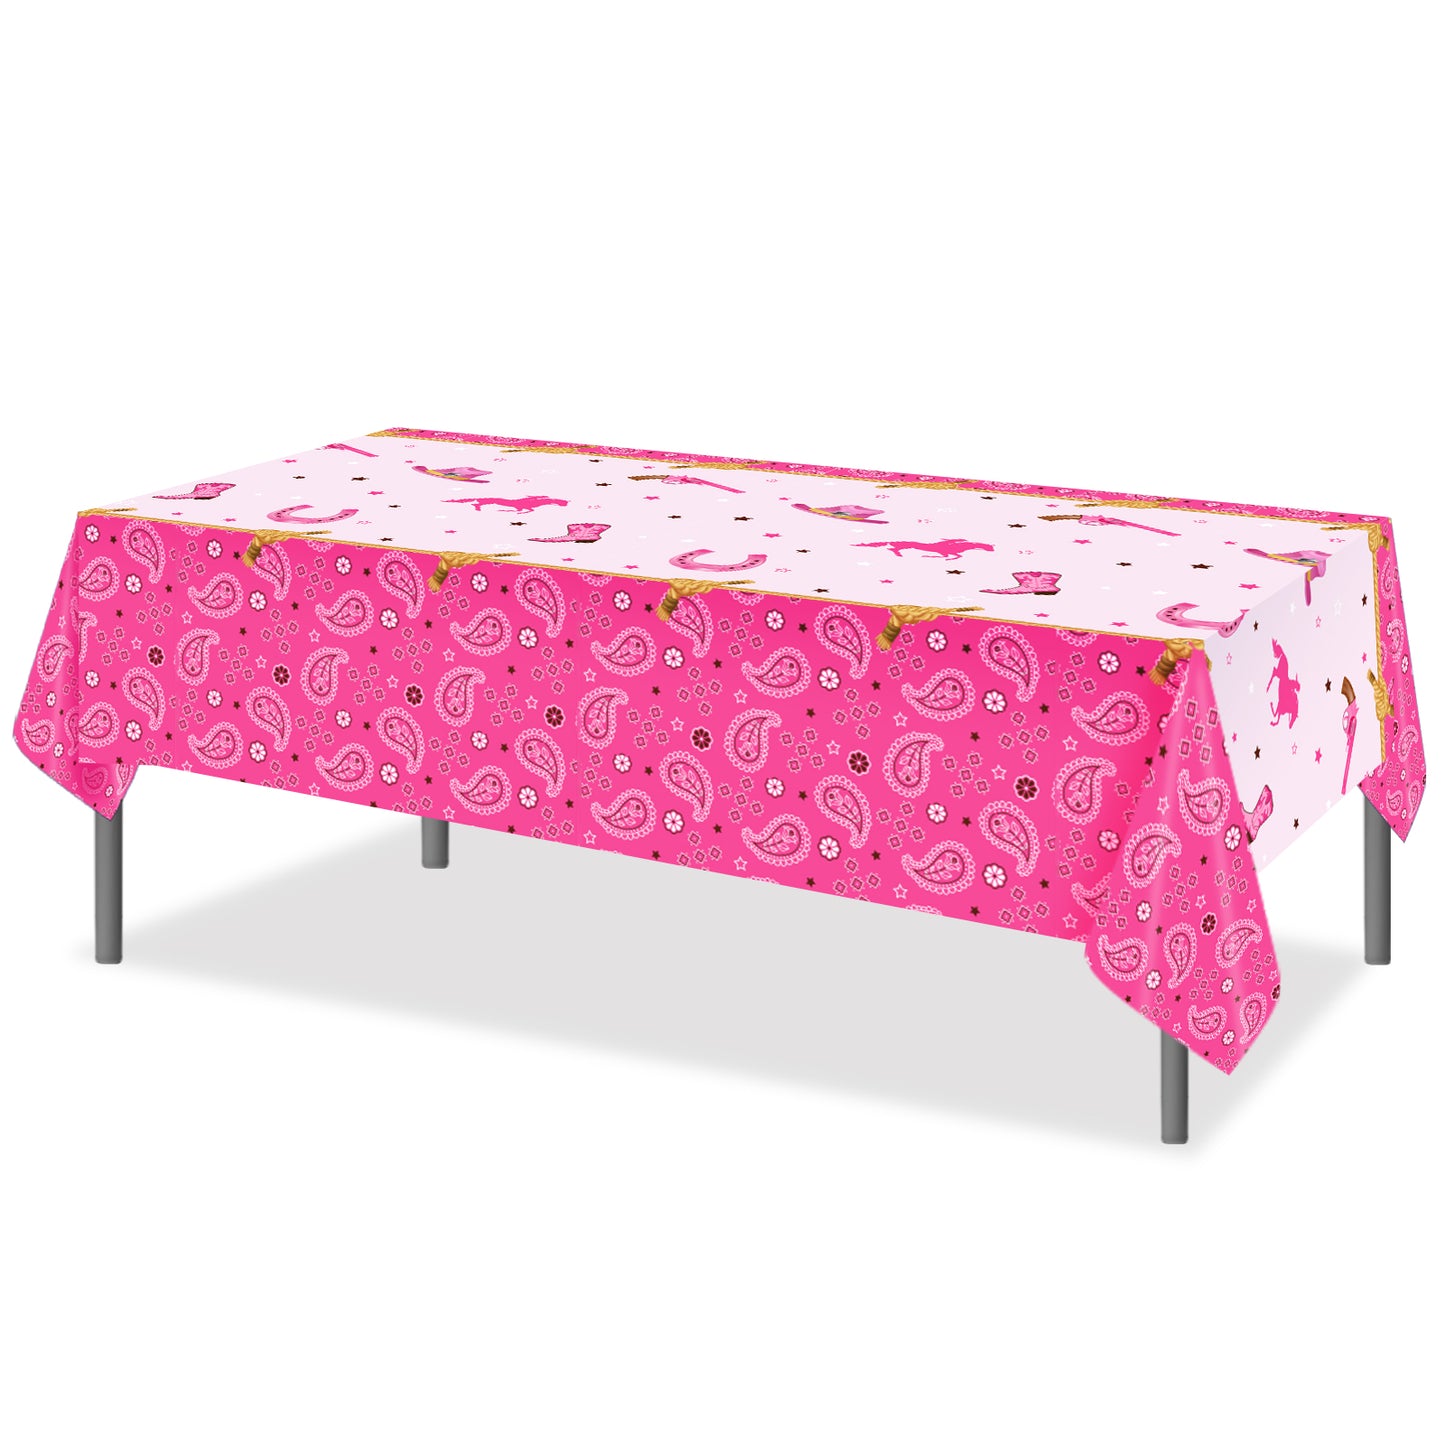 Cowgirl Table Cover